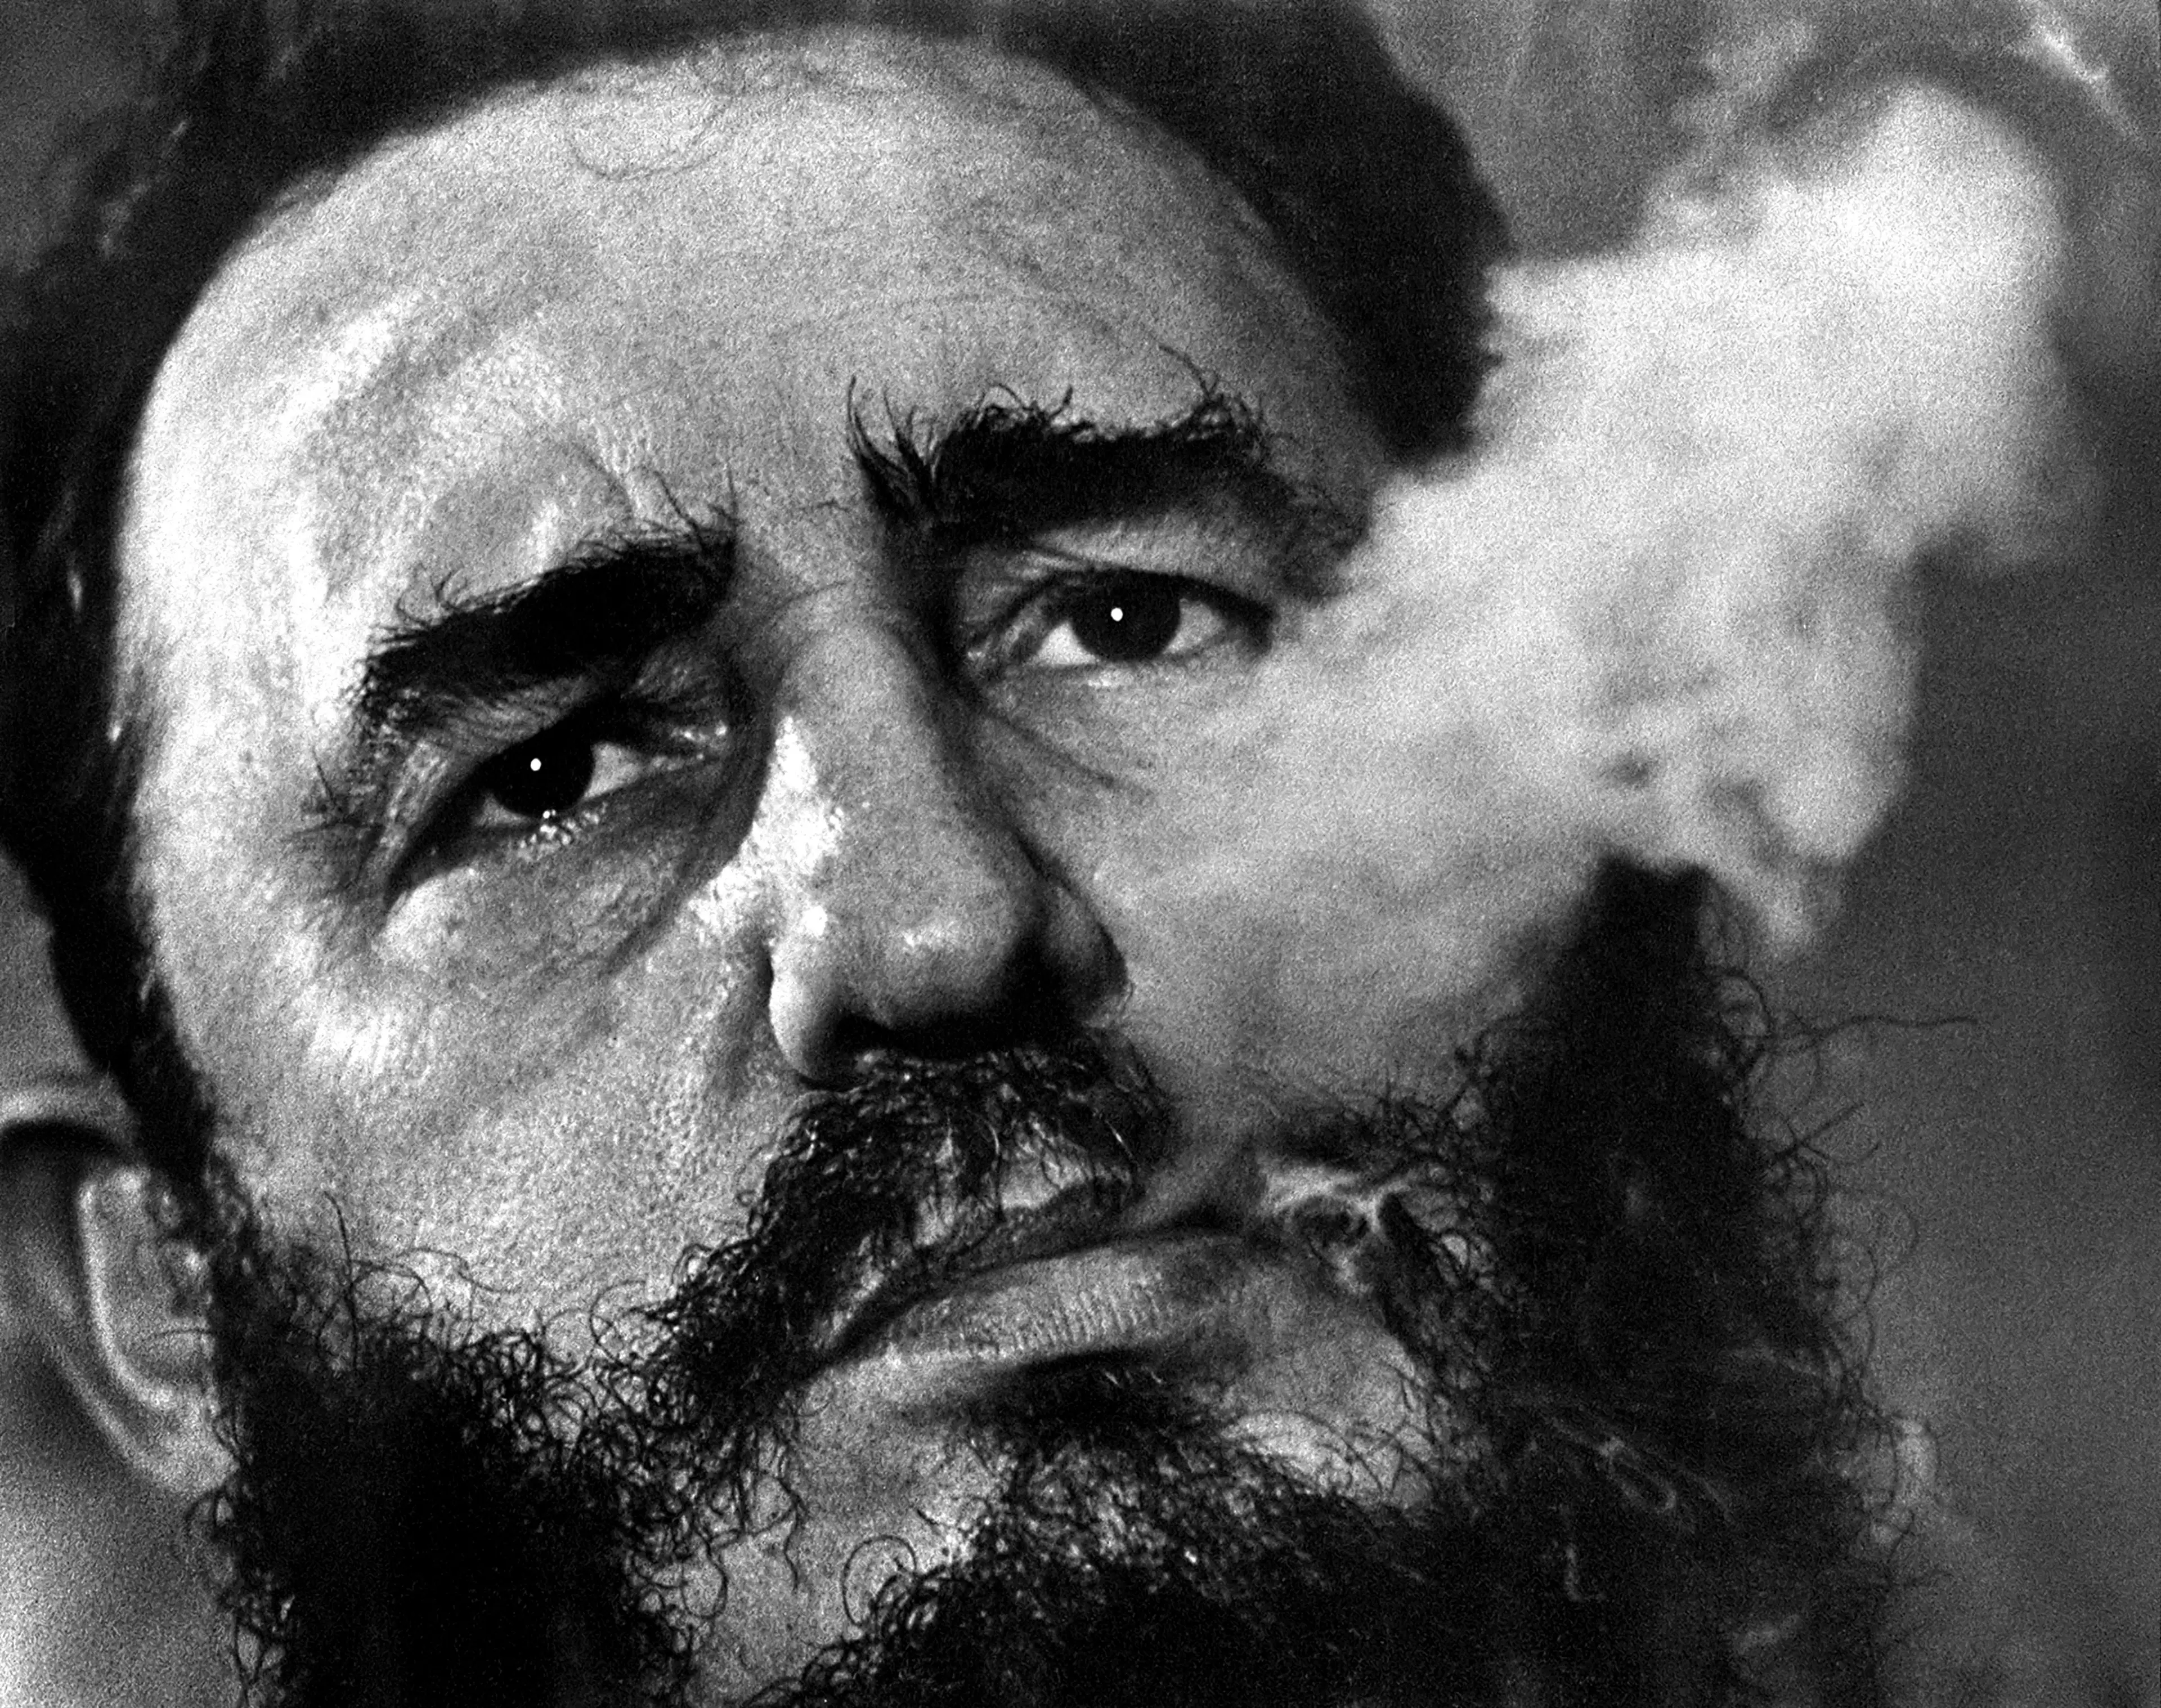 The CIA And Others Reportedly Tried To Kill Fidel Castro 638 Times